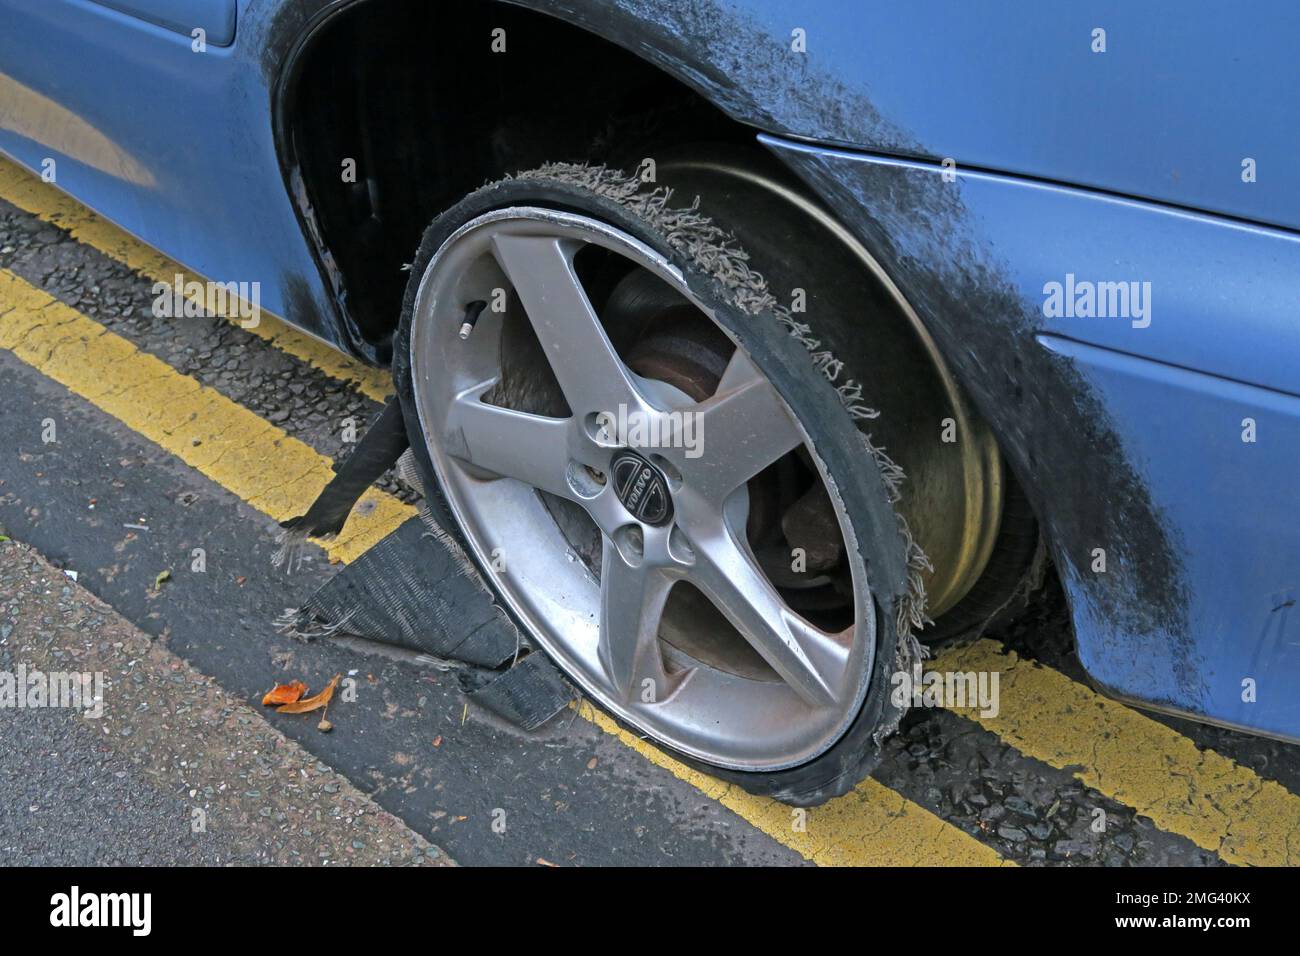 Front car tyre shredded at speed, stopped on double yellow lines, Cheshire, England, UK - Flat low profile tyre on alloy rim, ripped open Stock Photo